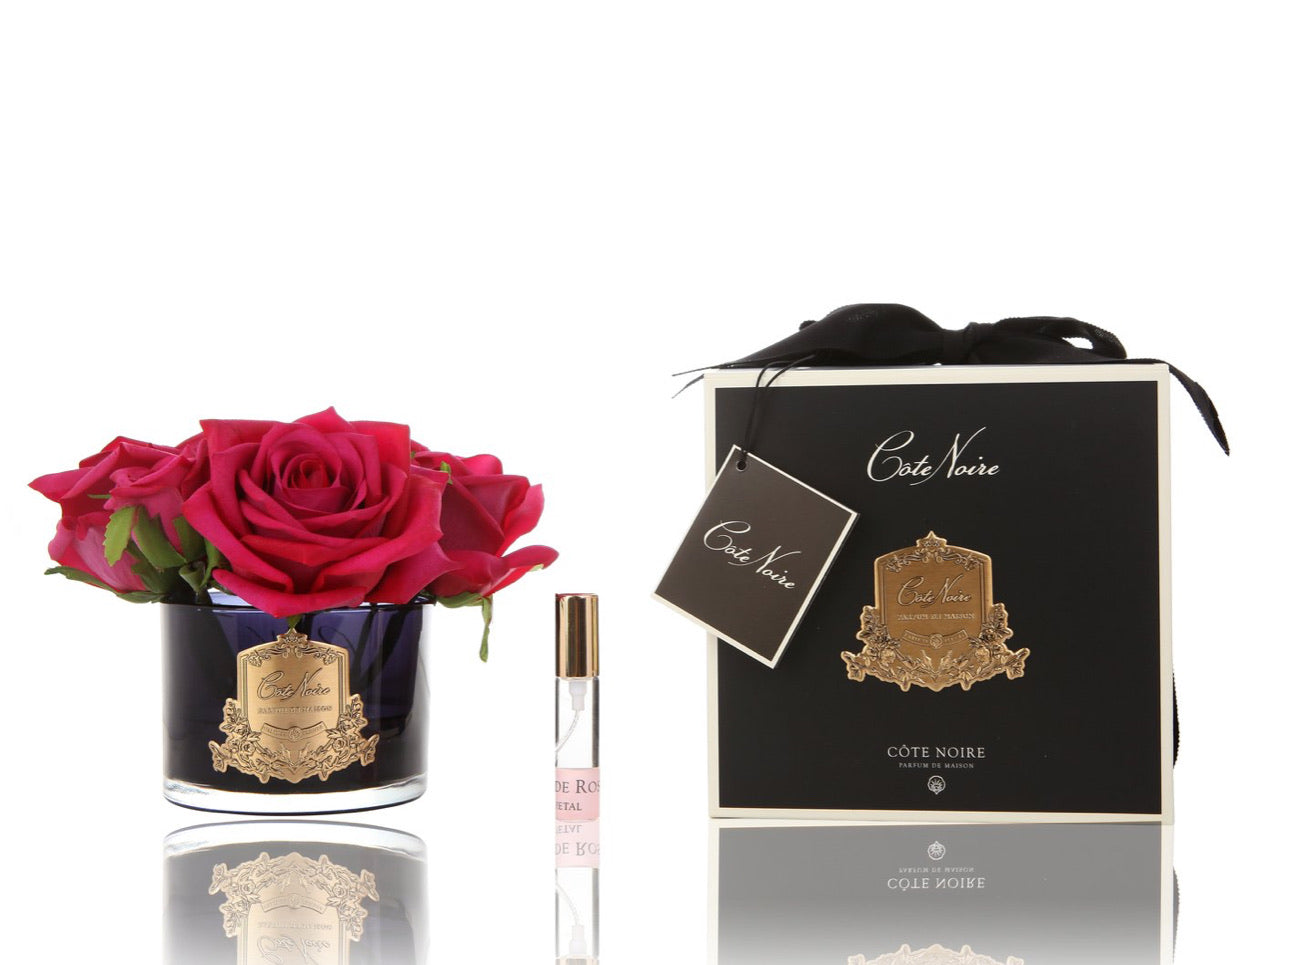 PERFUMED NATURAL TOUCH 5 ROSES IN BLACK GLASS - CARMINE RED